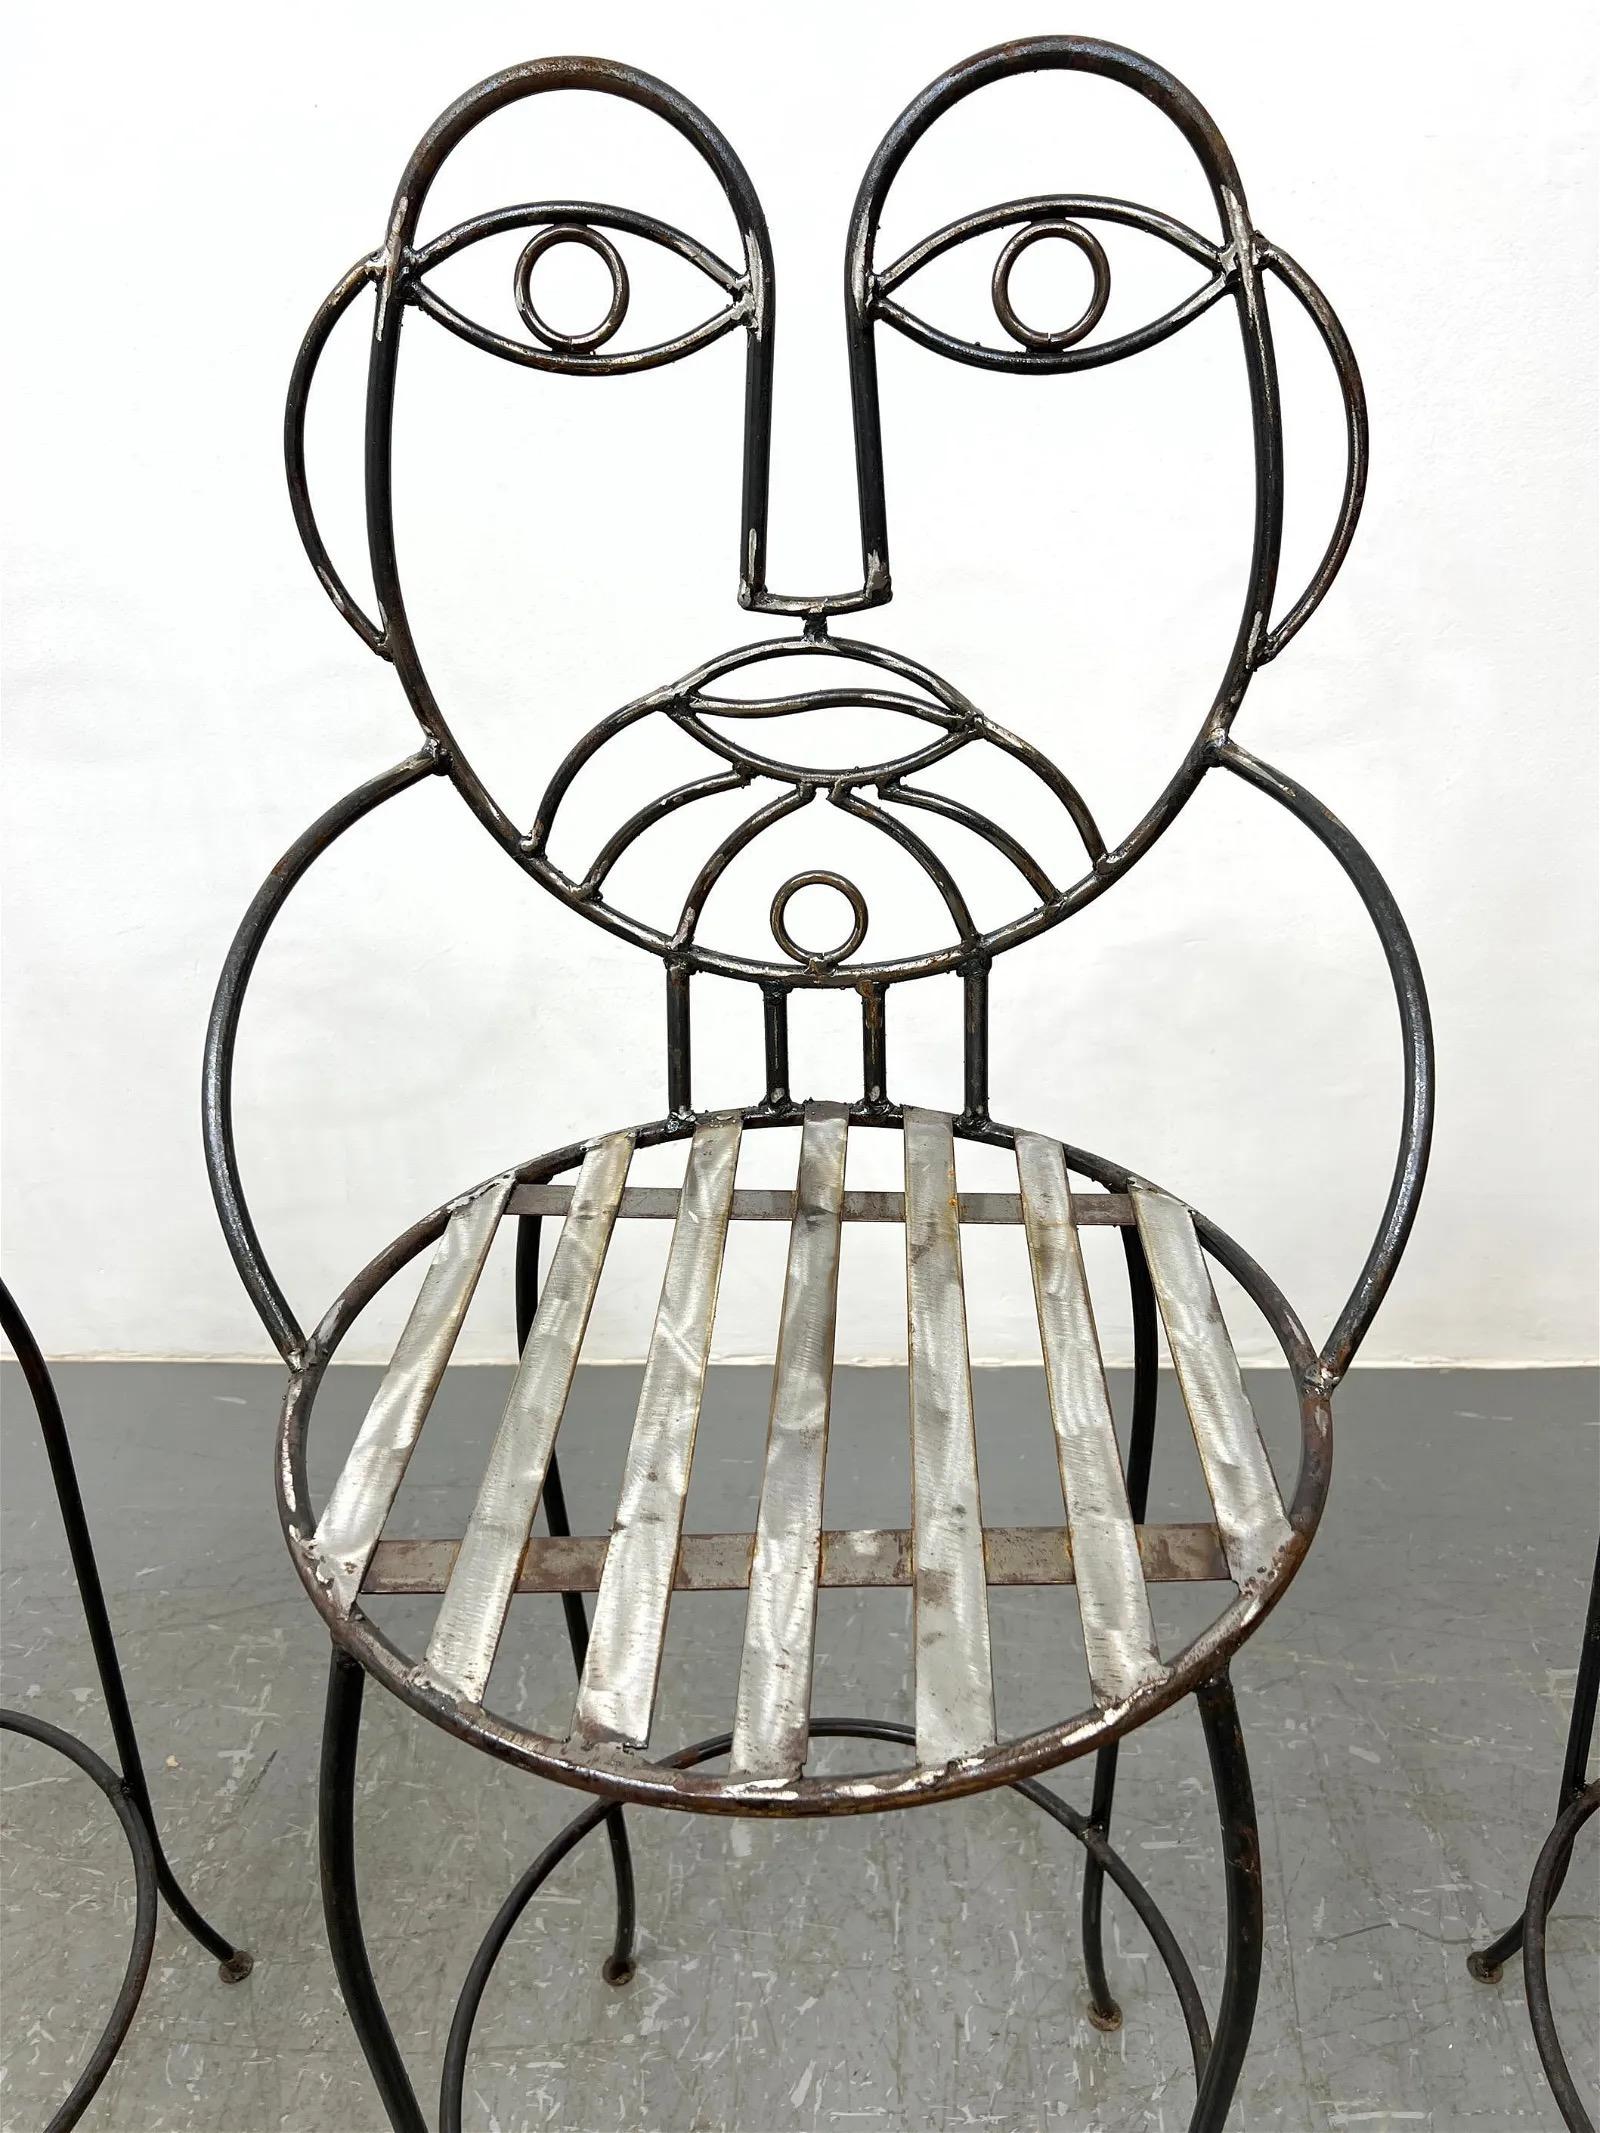 A set of 4 wrought iron barstools with round metal seats and figurative backs in the shape of a face.
